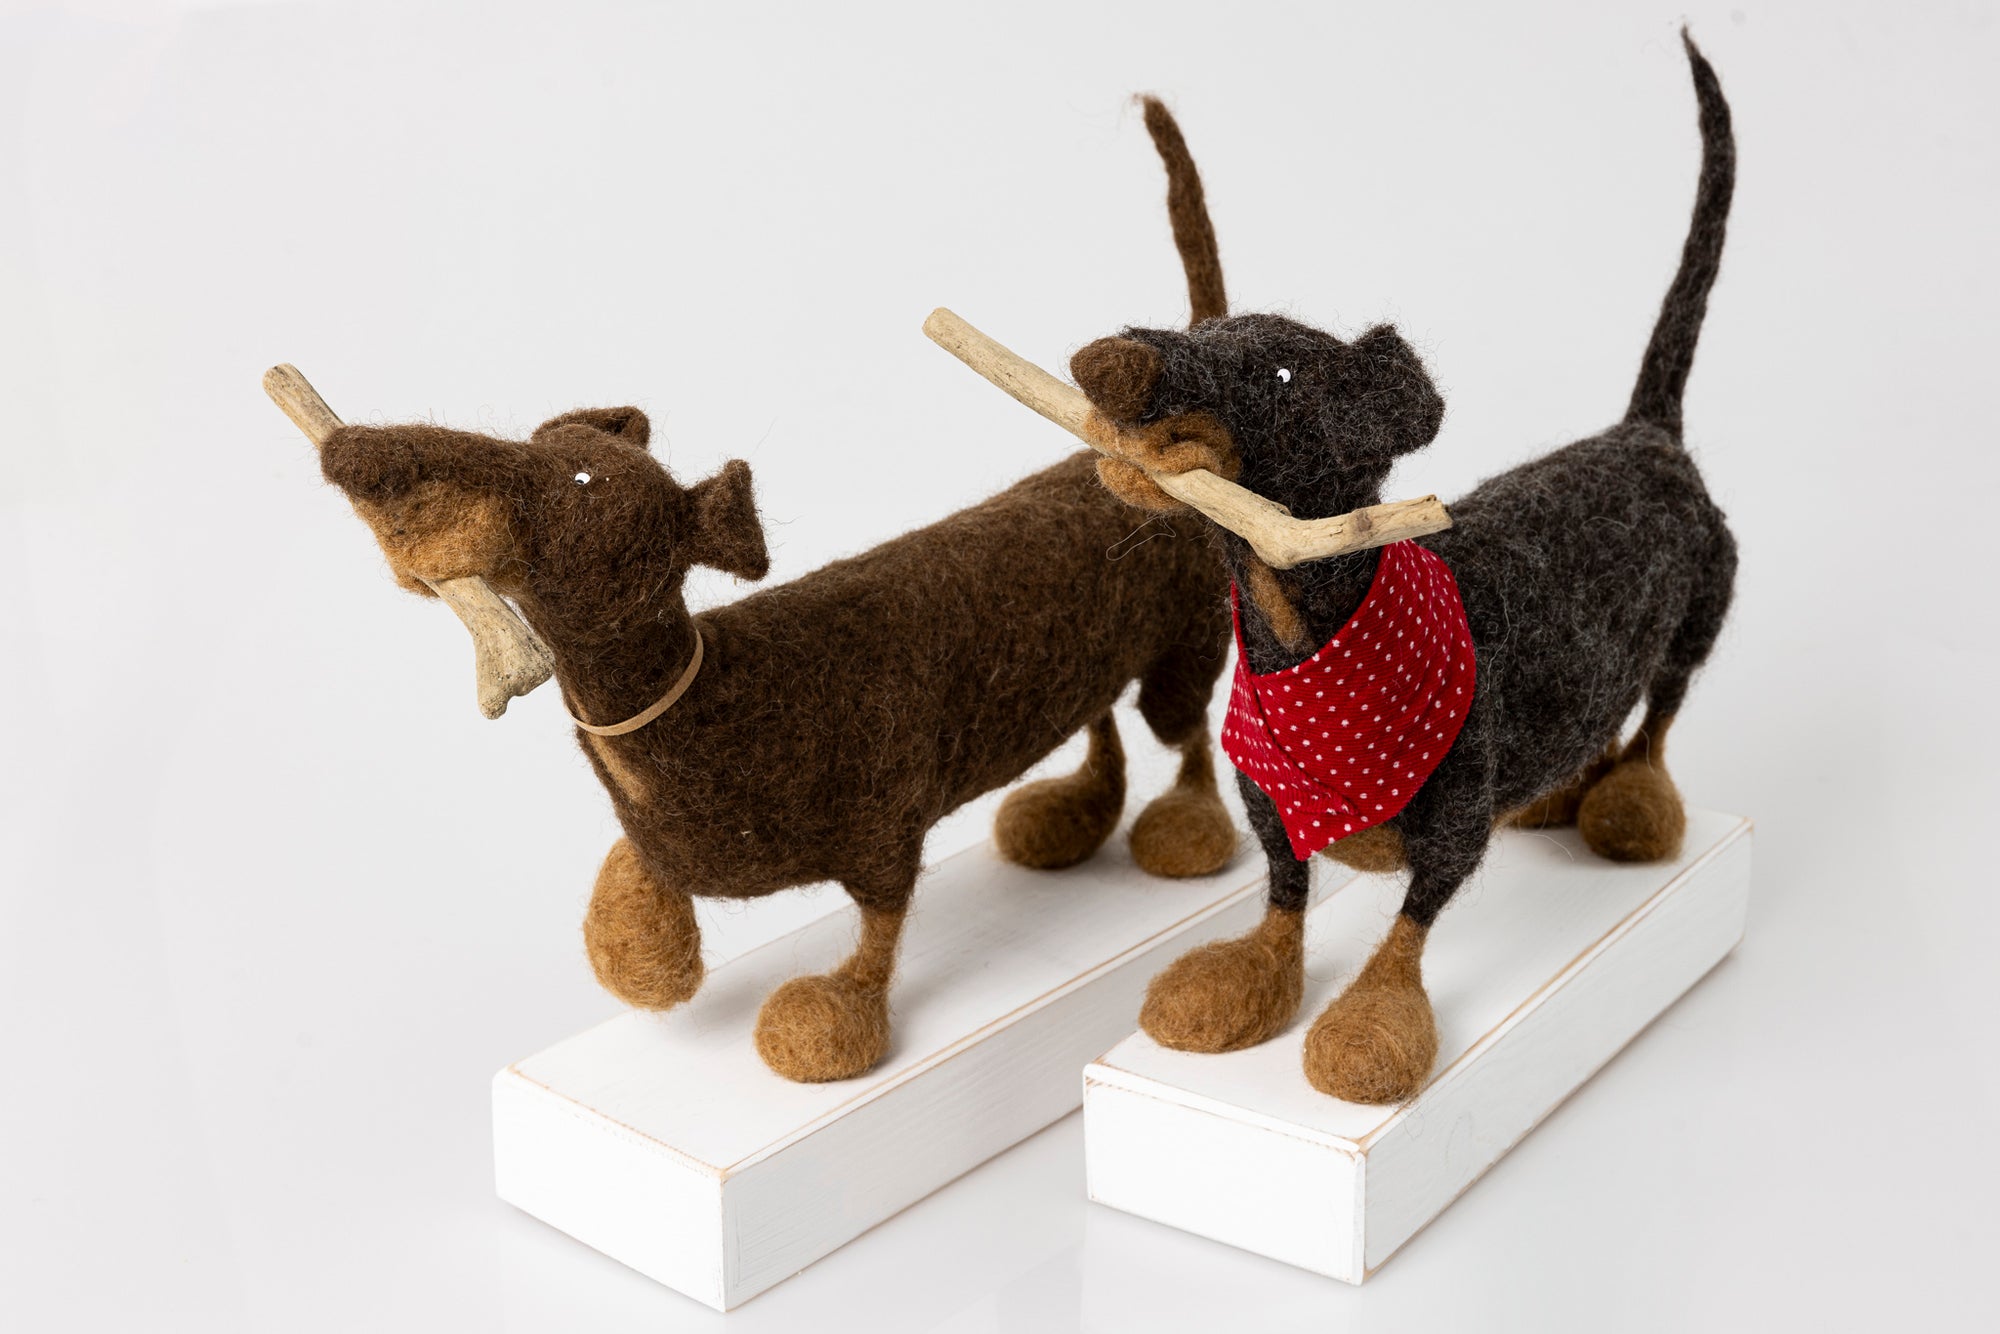 'Nala & Jackson' needlefelt character dogs by Kate Toms, available at Padstow Gallery, Cornwall